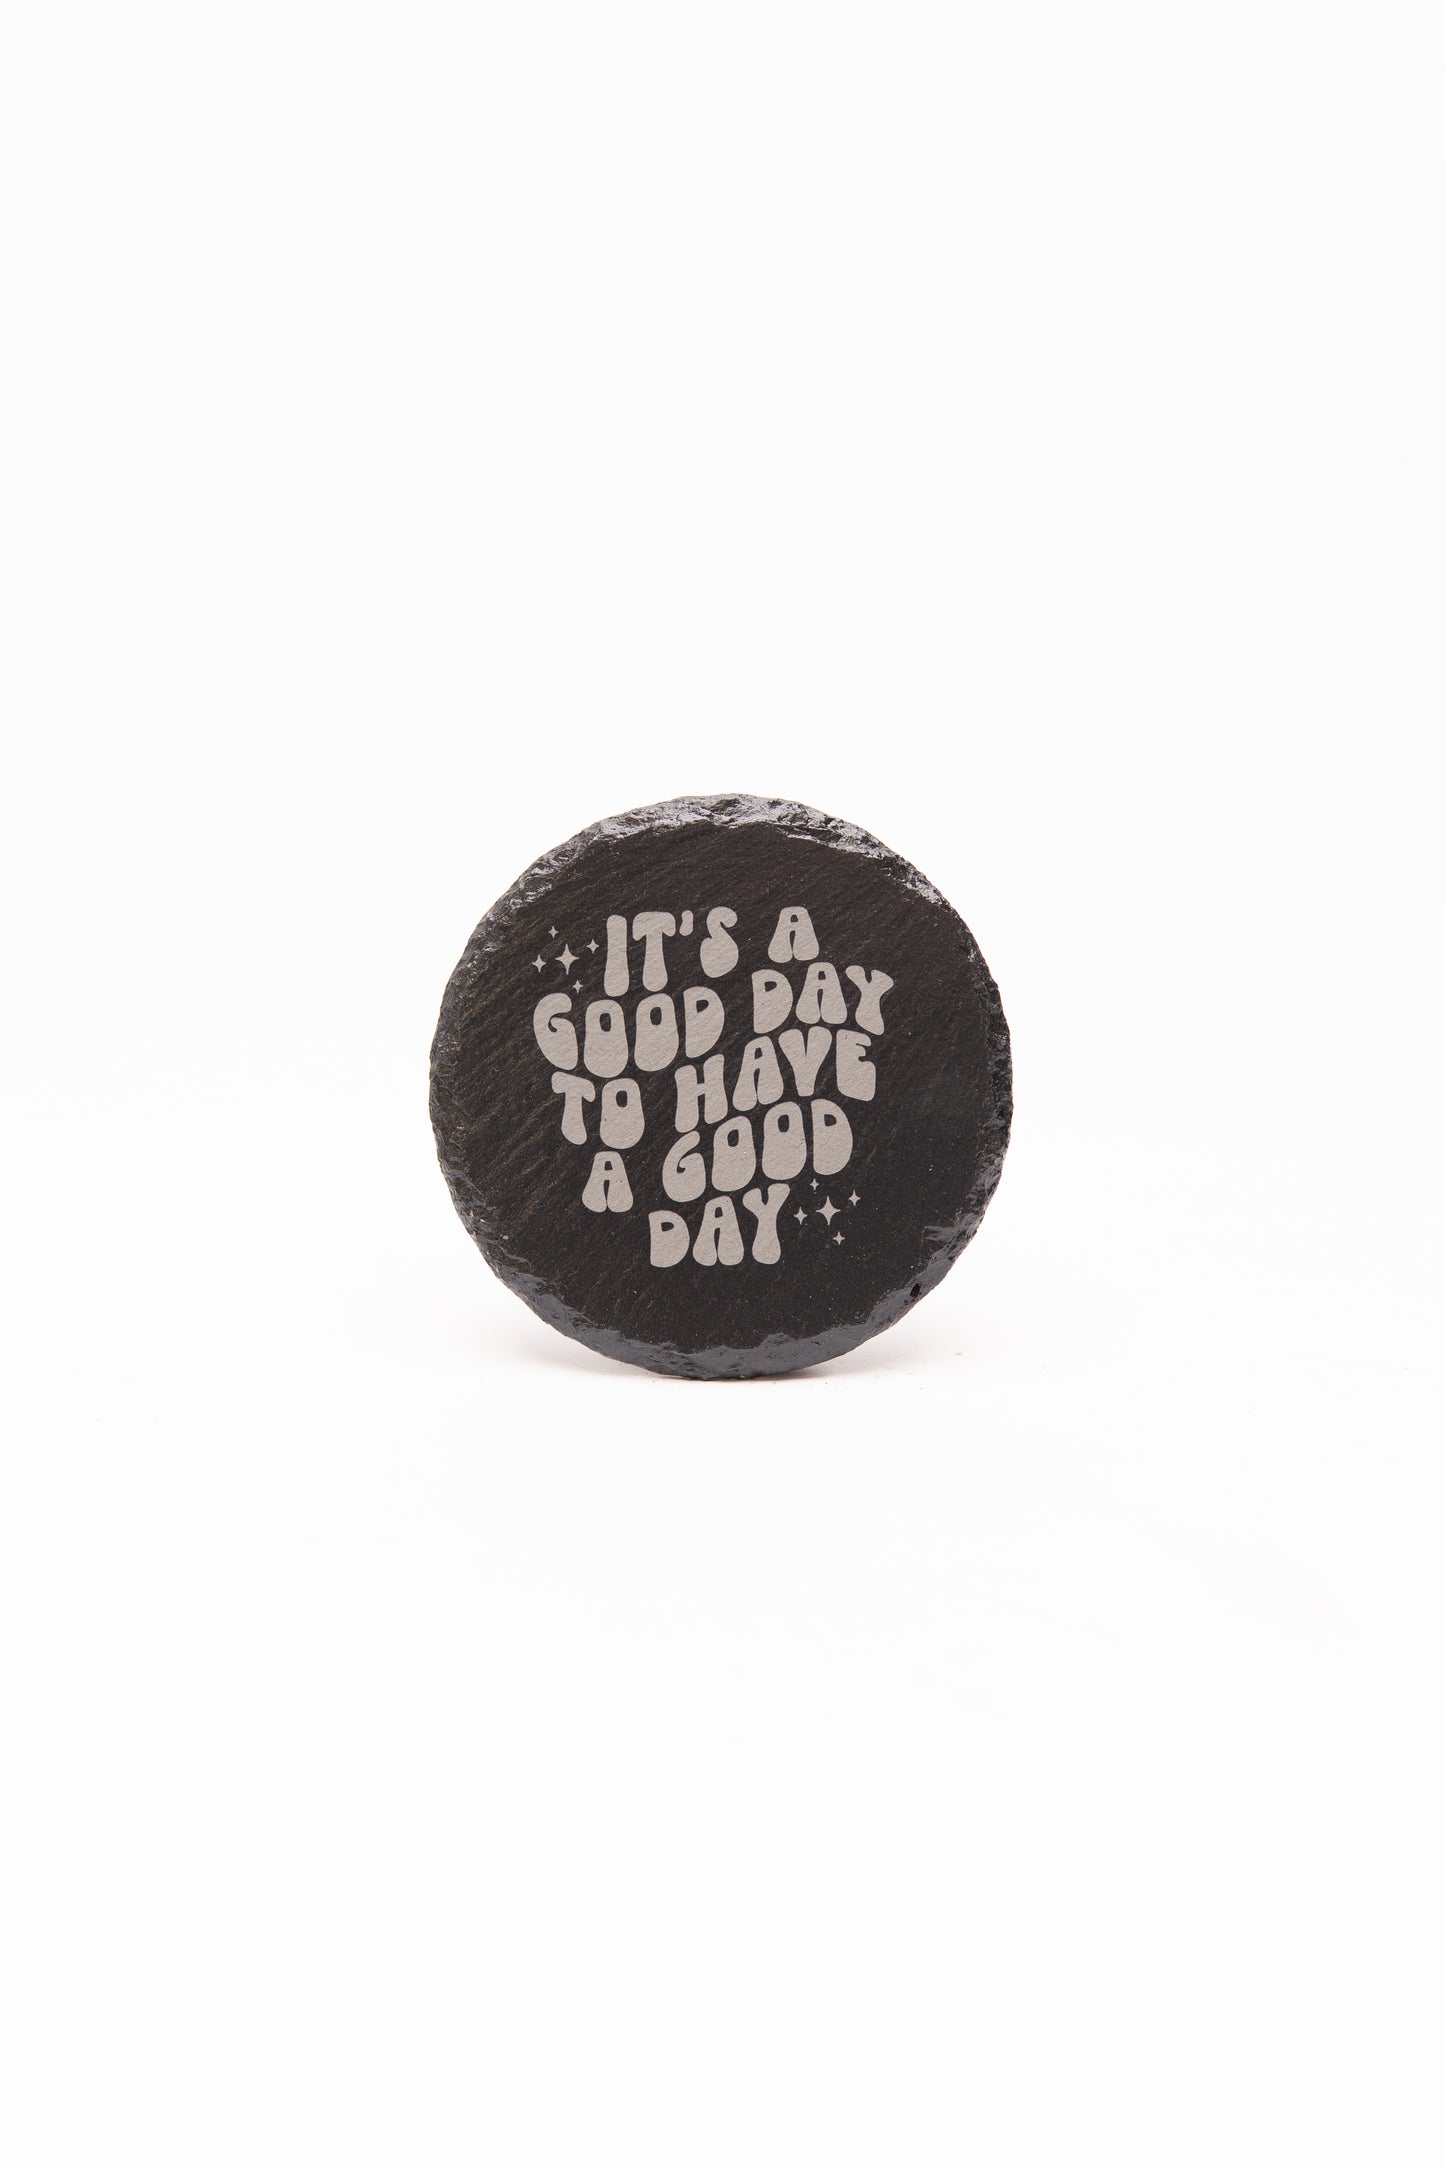 "It's a Good Day to have a Good Day" Coaster